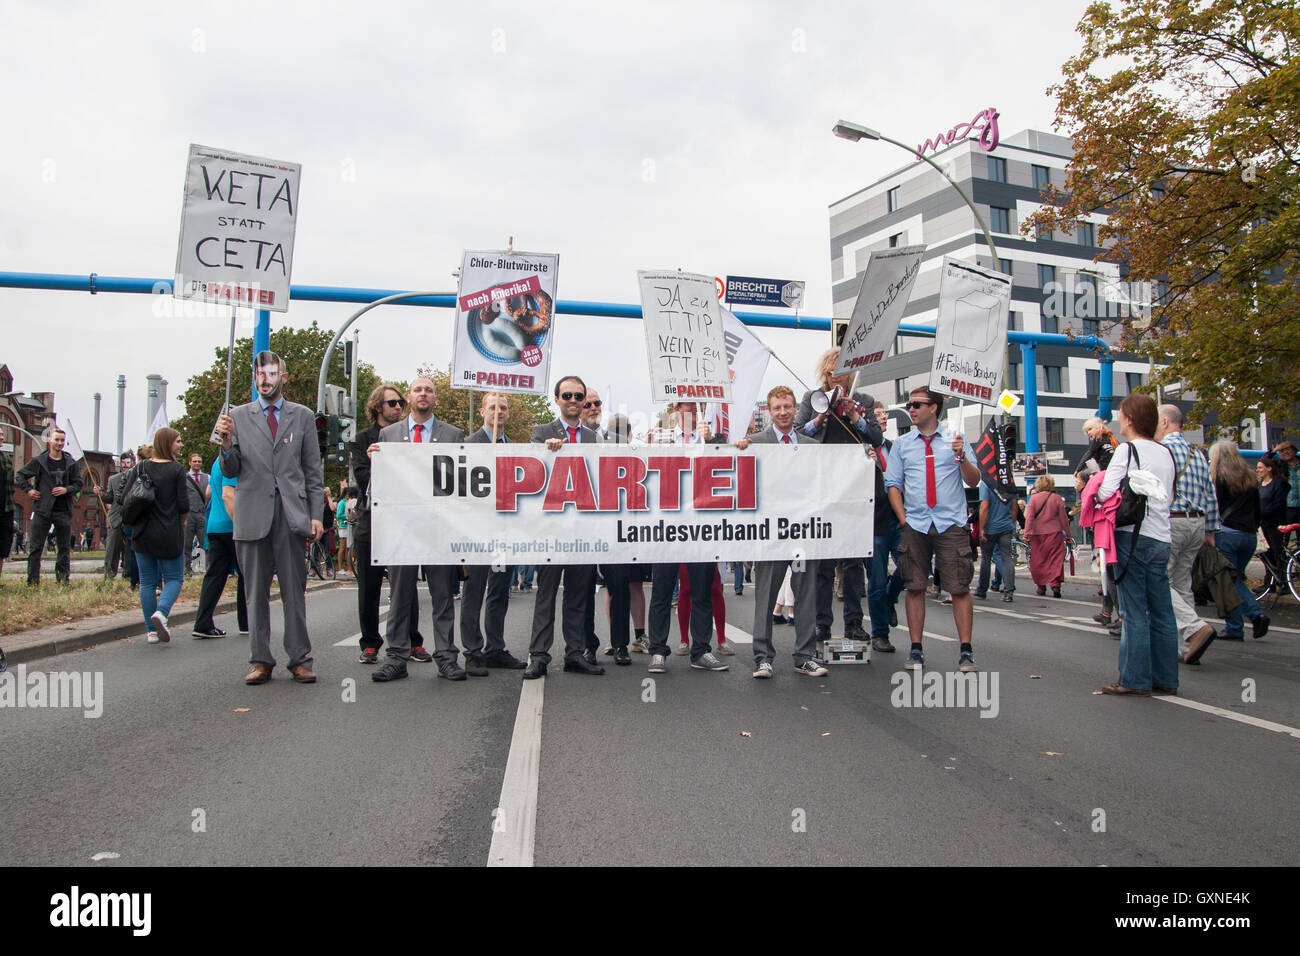 Berlin, Germany. 17th September, 2016. Demonstration against TTIP and CETA. Stock Photo